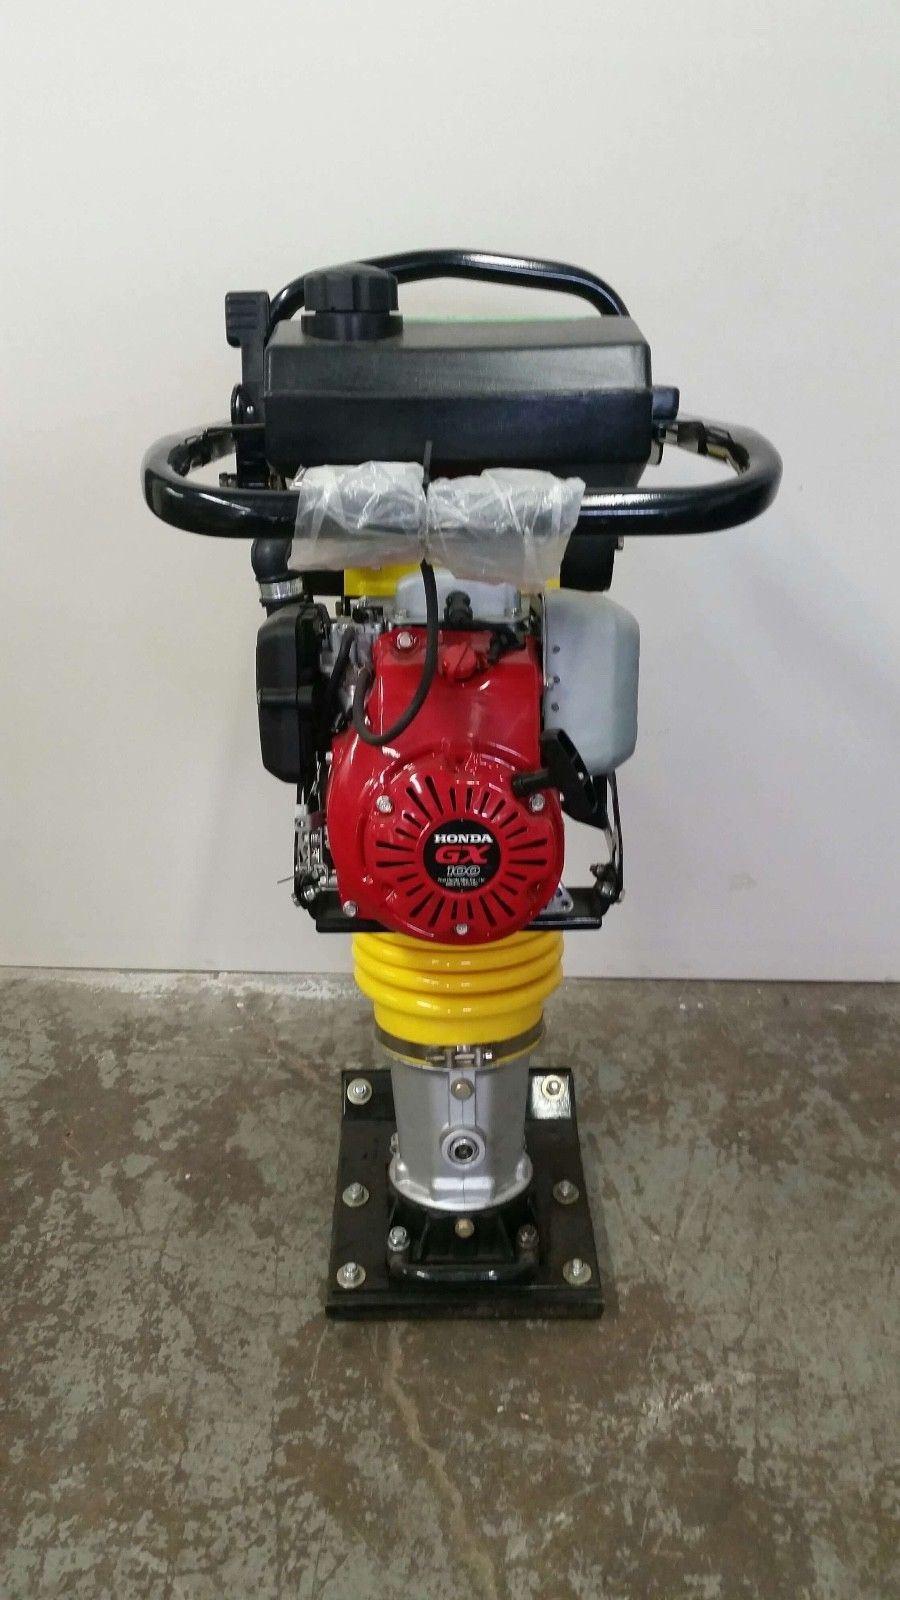 High Efficiency Internal Combustion Impact Tamping Rammer Price